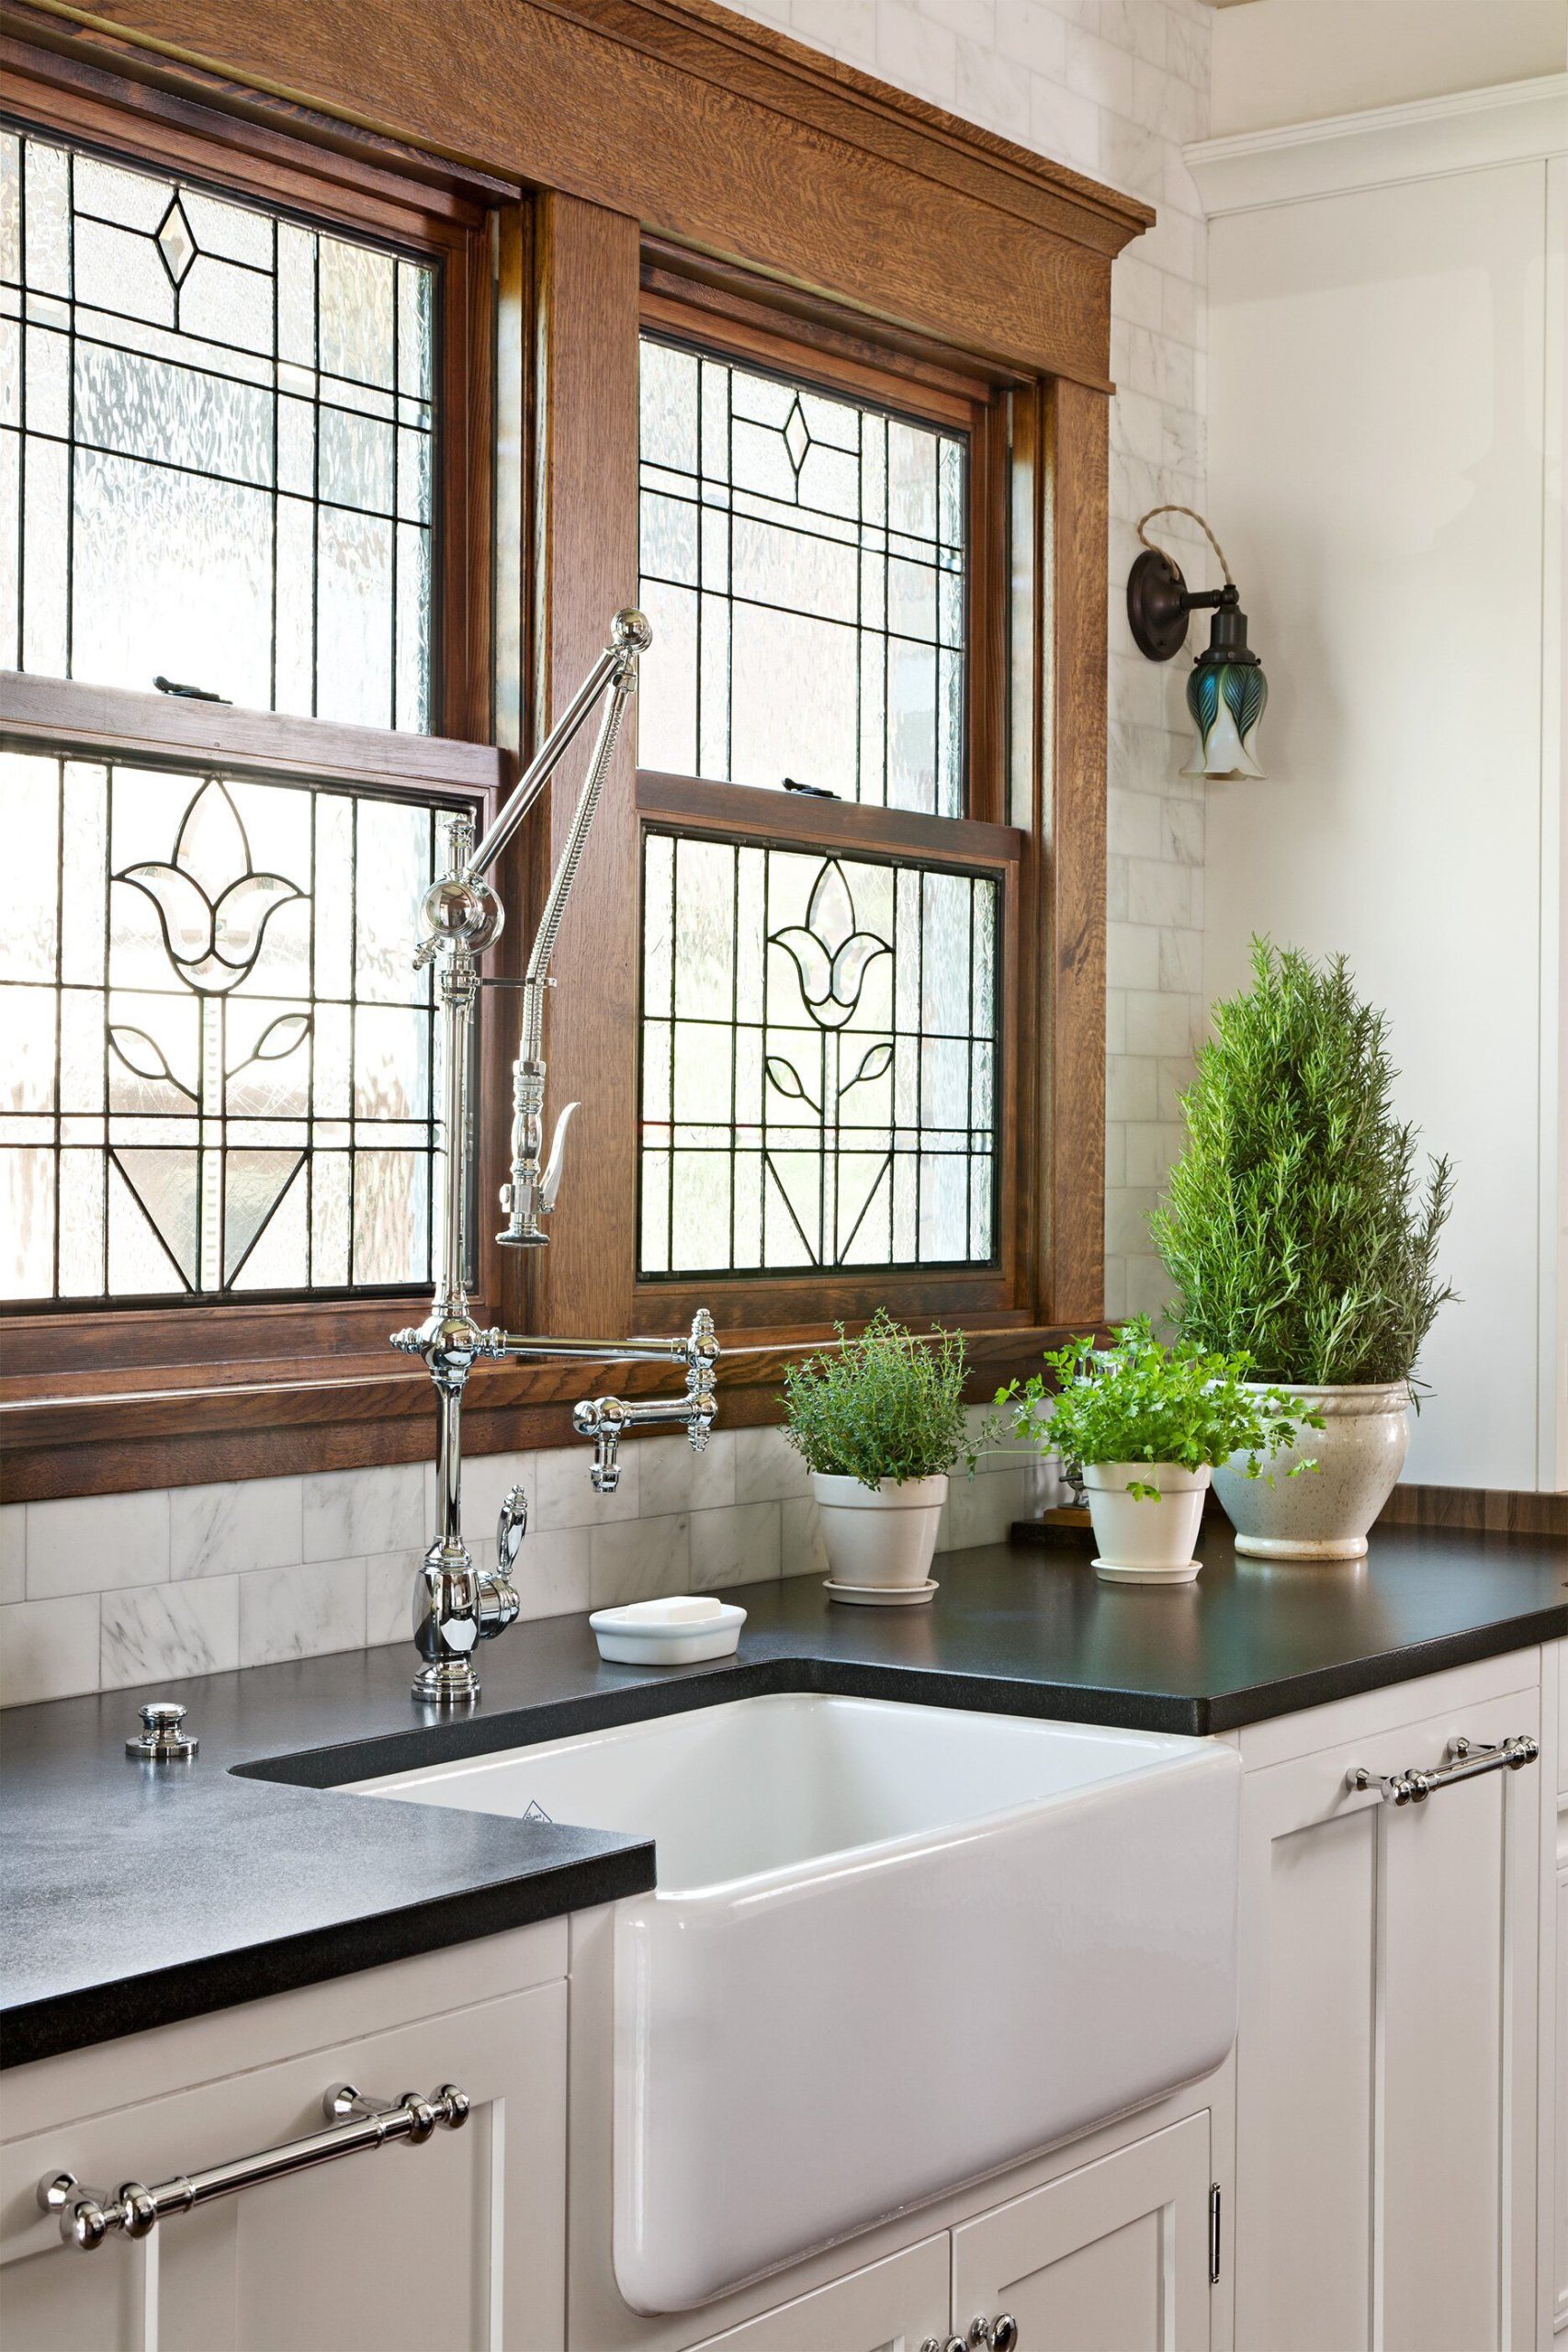 Rustic Single-Hung Window for Kitchen